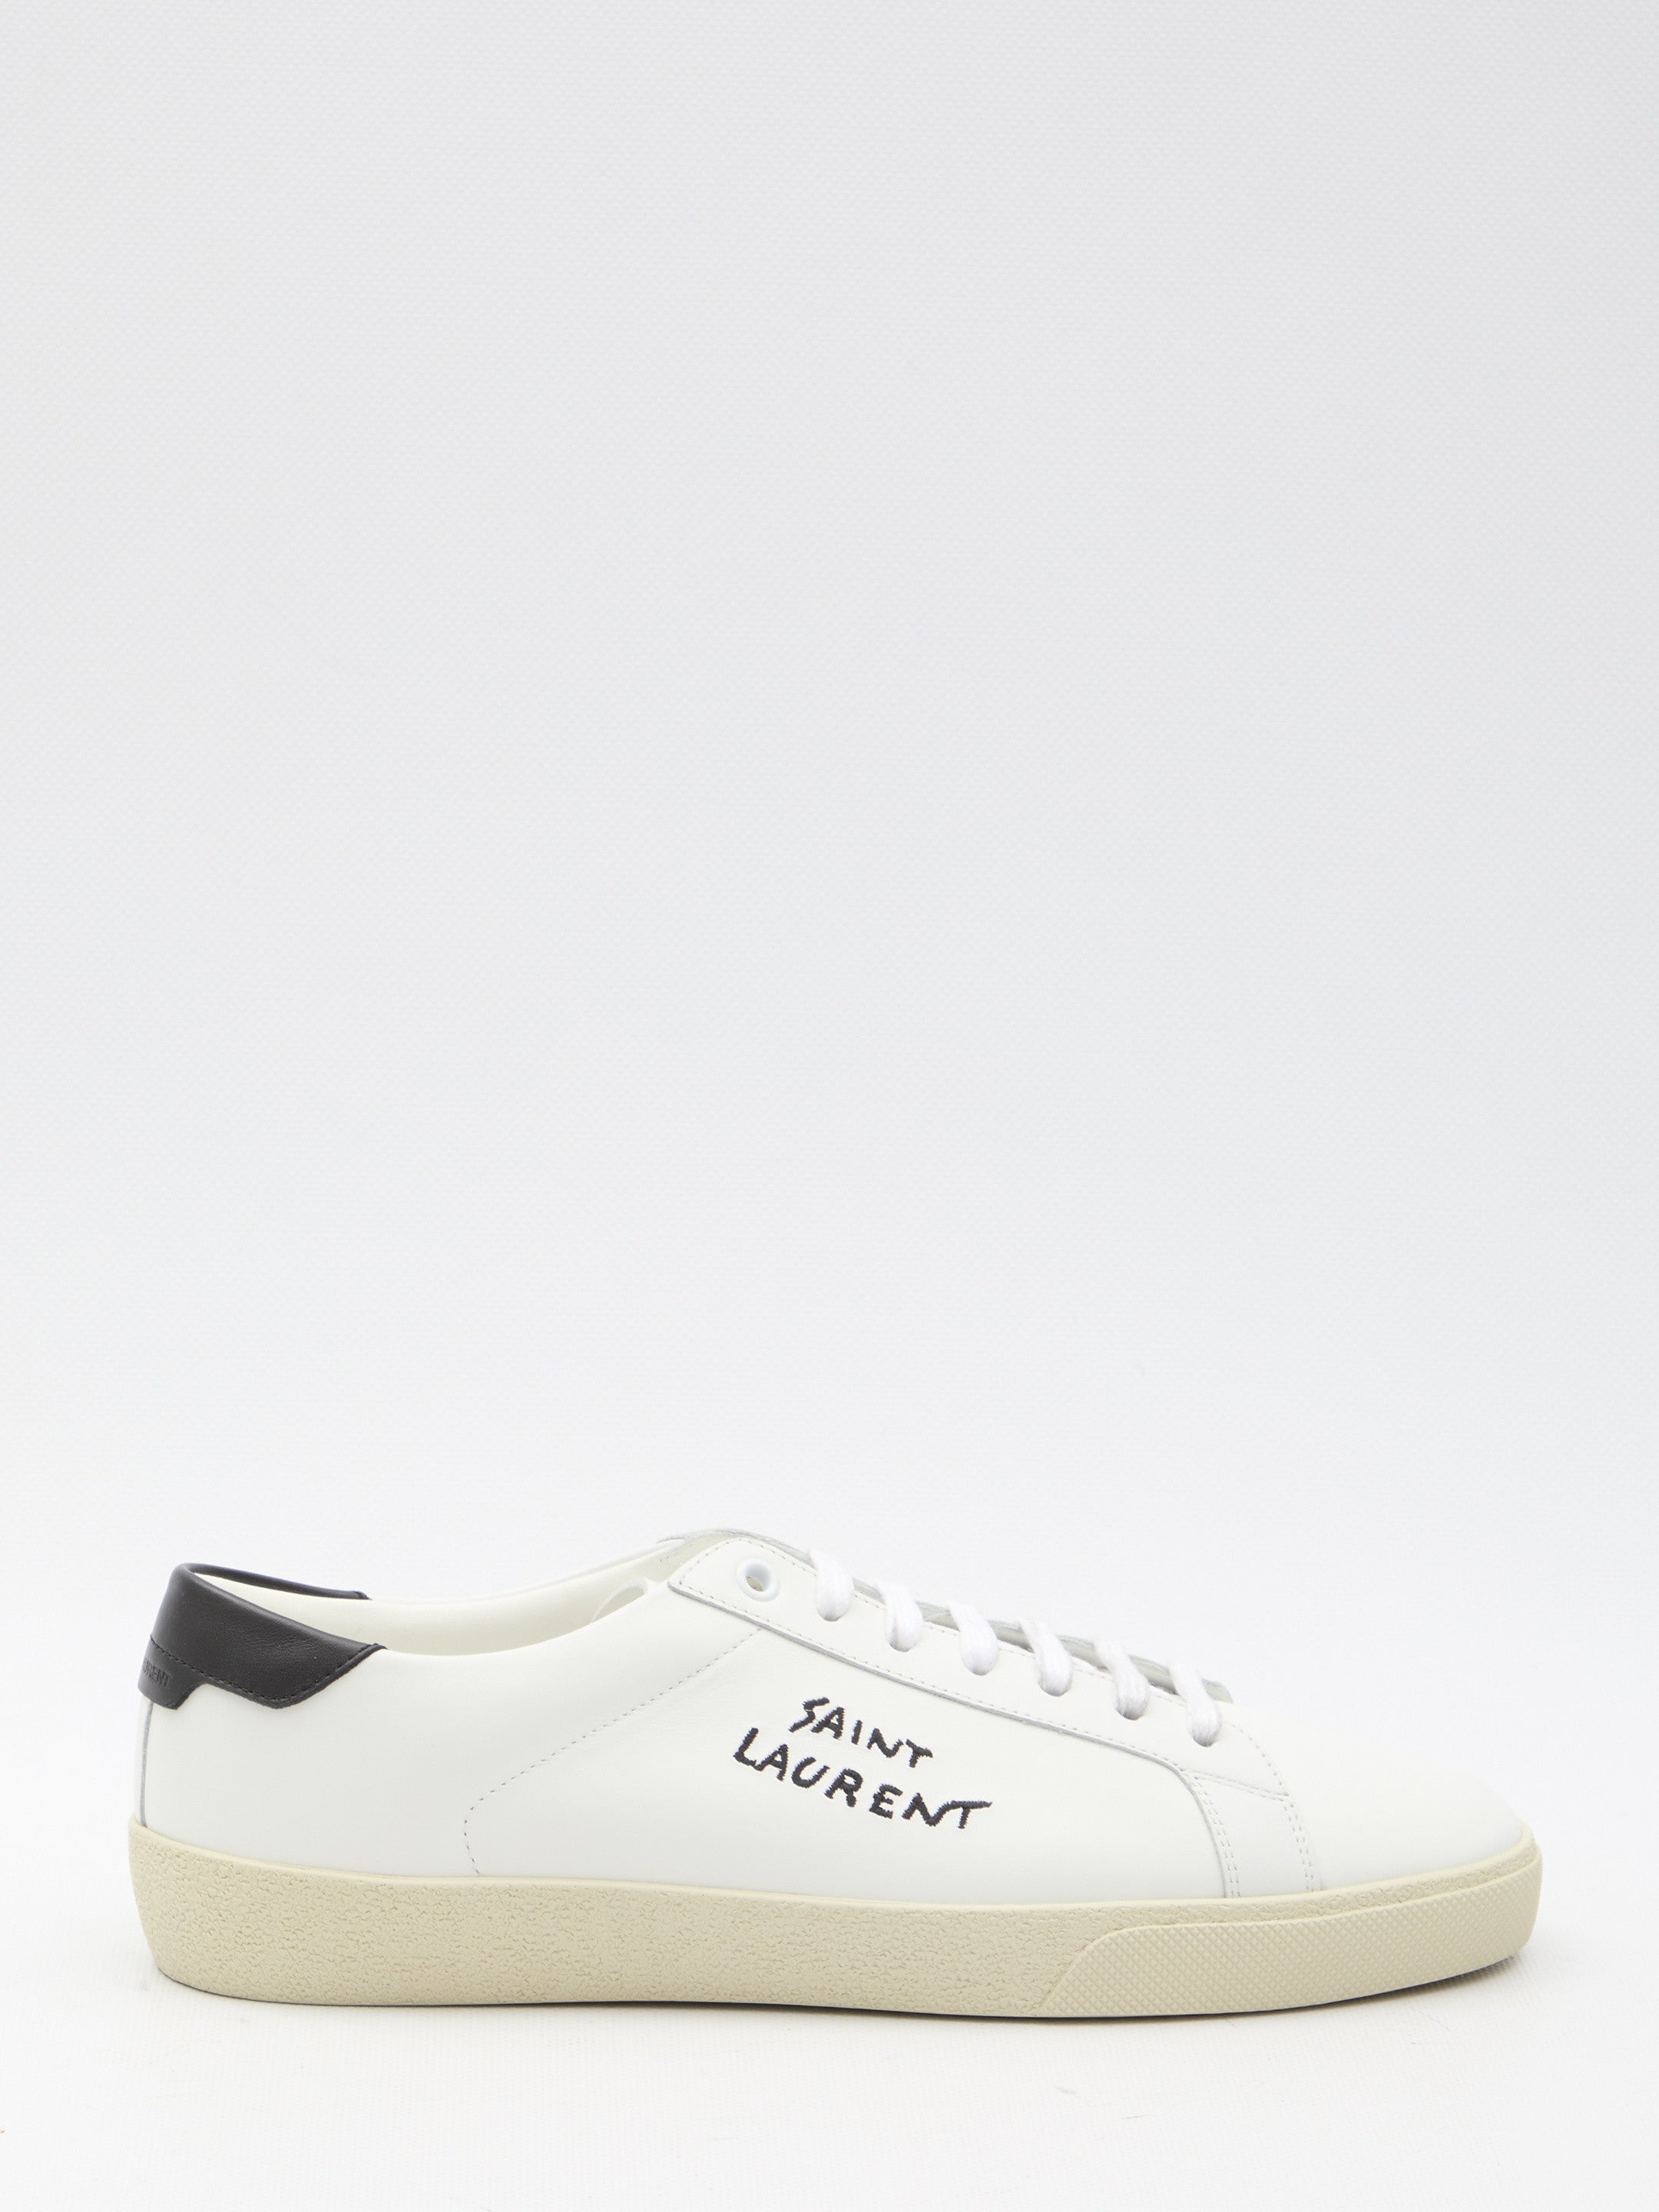 SAINT-LAURENT-OUTLET-SALE-Court-SL06-sneakers-Sneakers-40-WHITE-ARCHIVE-COLLECTION.jpg